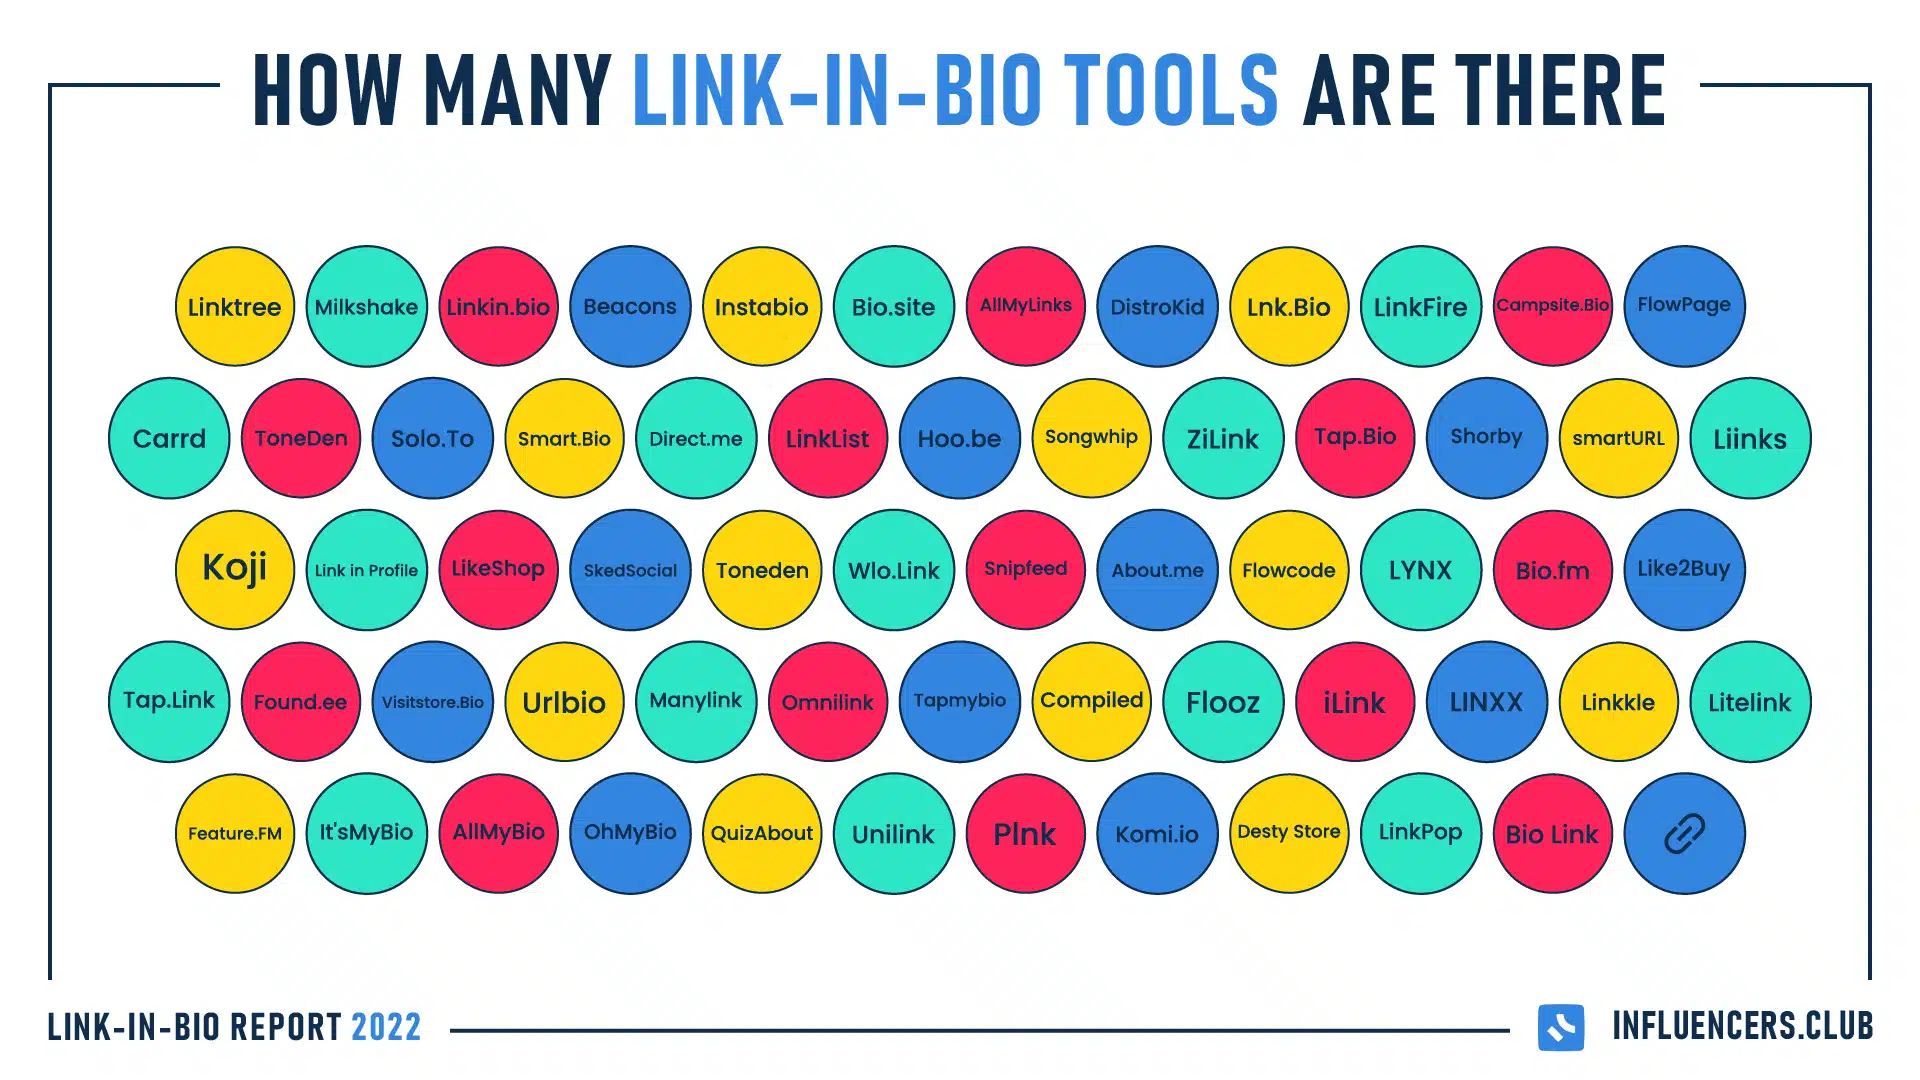 How many link-in-bio tools are there